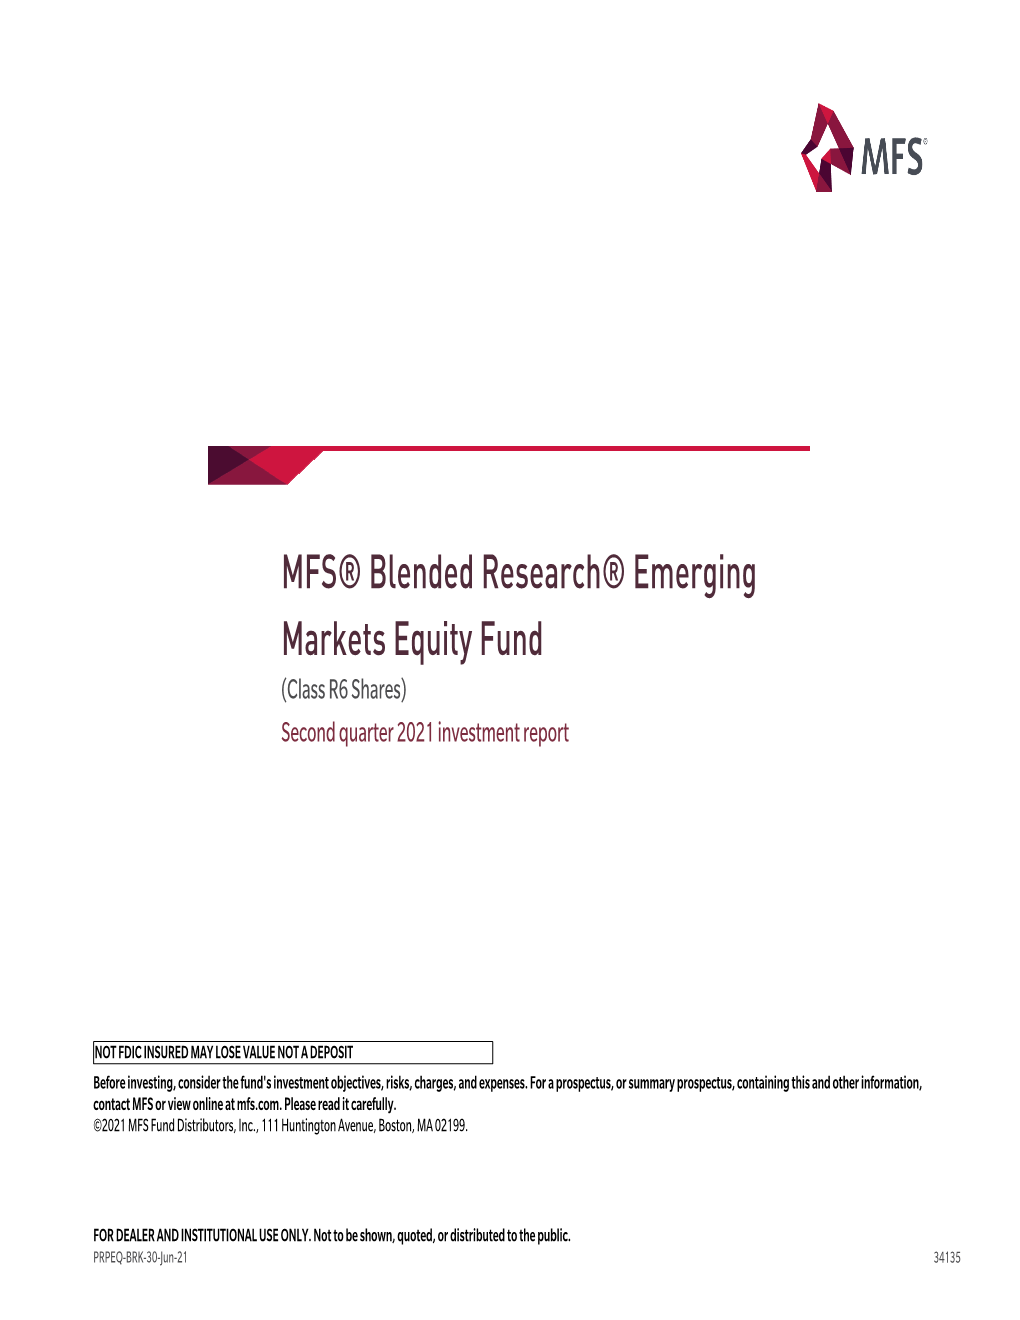 MFS® Blended Research® Emerging Markets Equity Fund (Class R6 Shares) Second Quarter 2021 Investment Report